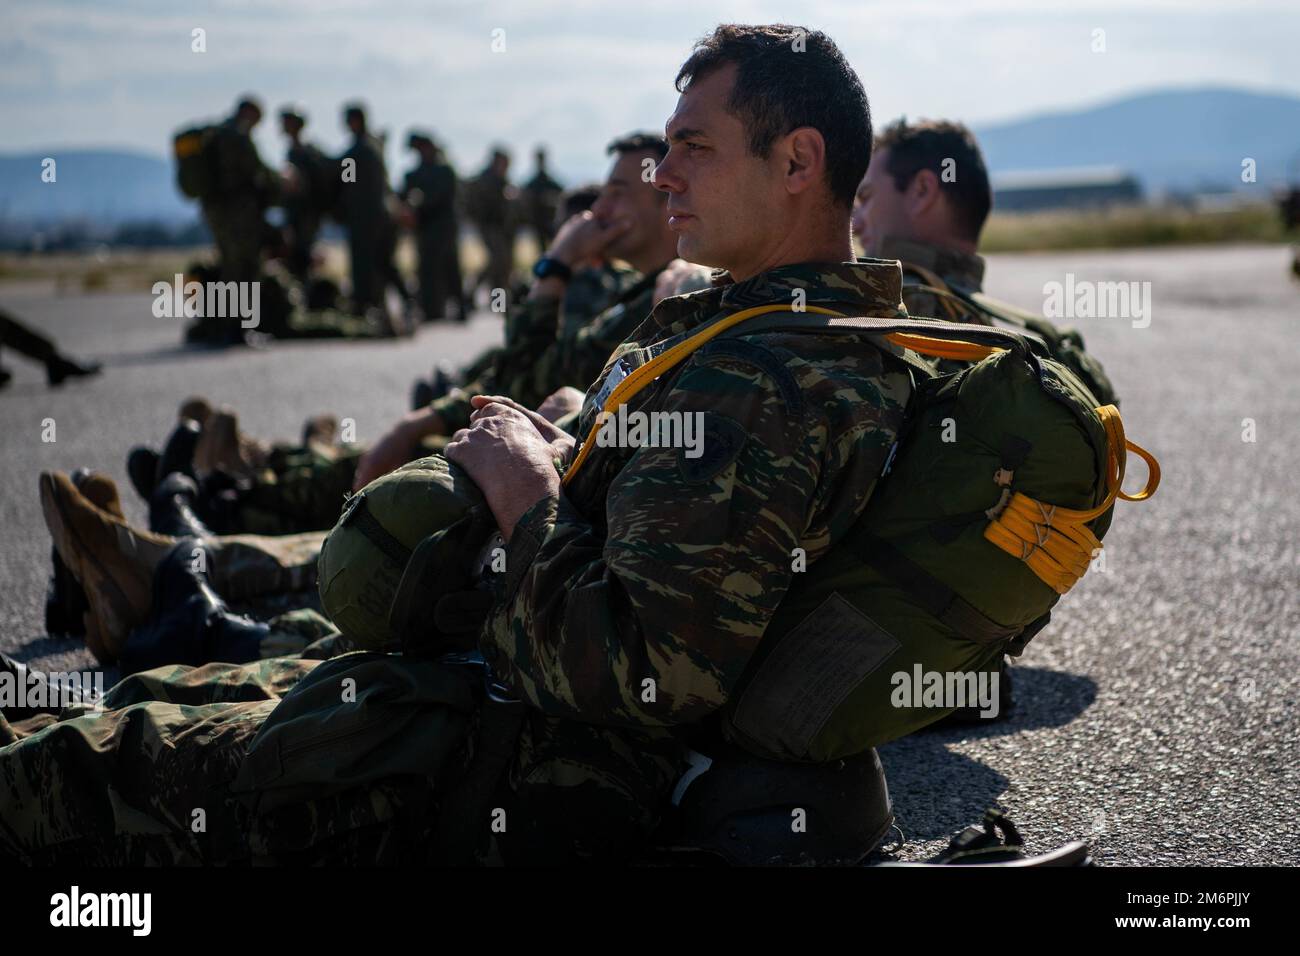 A Greek paratrooper prepares to participate in an airdrop during Exercise Stolen Cerberus IX at Elefsina Air Base, Greece, May 3, 2022. The objective of the training deployment and exercise is to enhance interoperability and airlift capabilities between U.S. and Greek Armed Forces, strengthen bilateral defense ties and execute aeromedical evacuation and jump training. Stock Photo